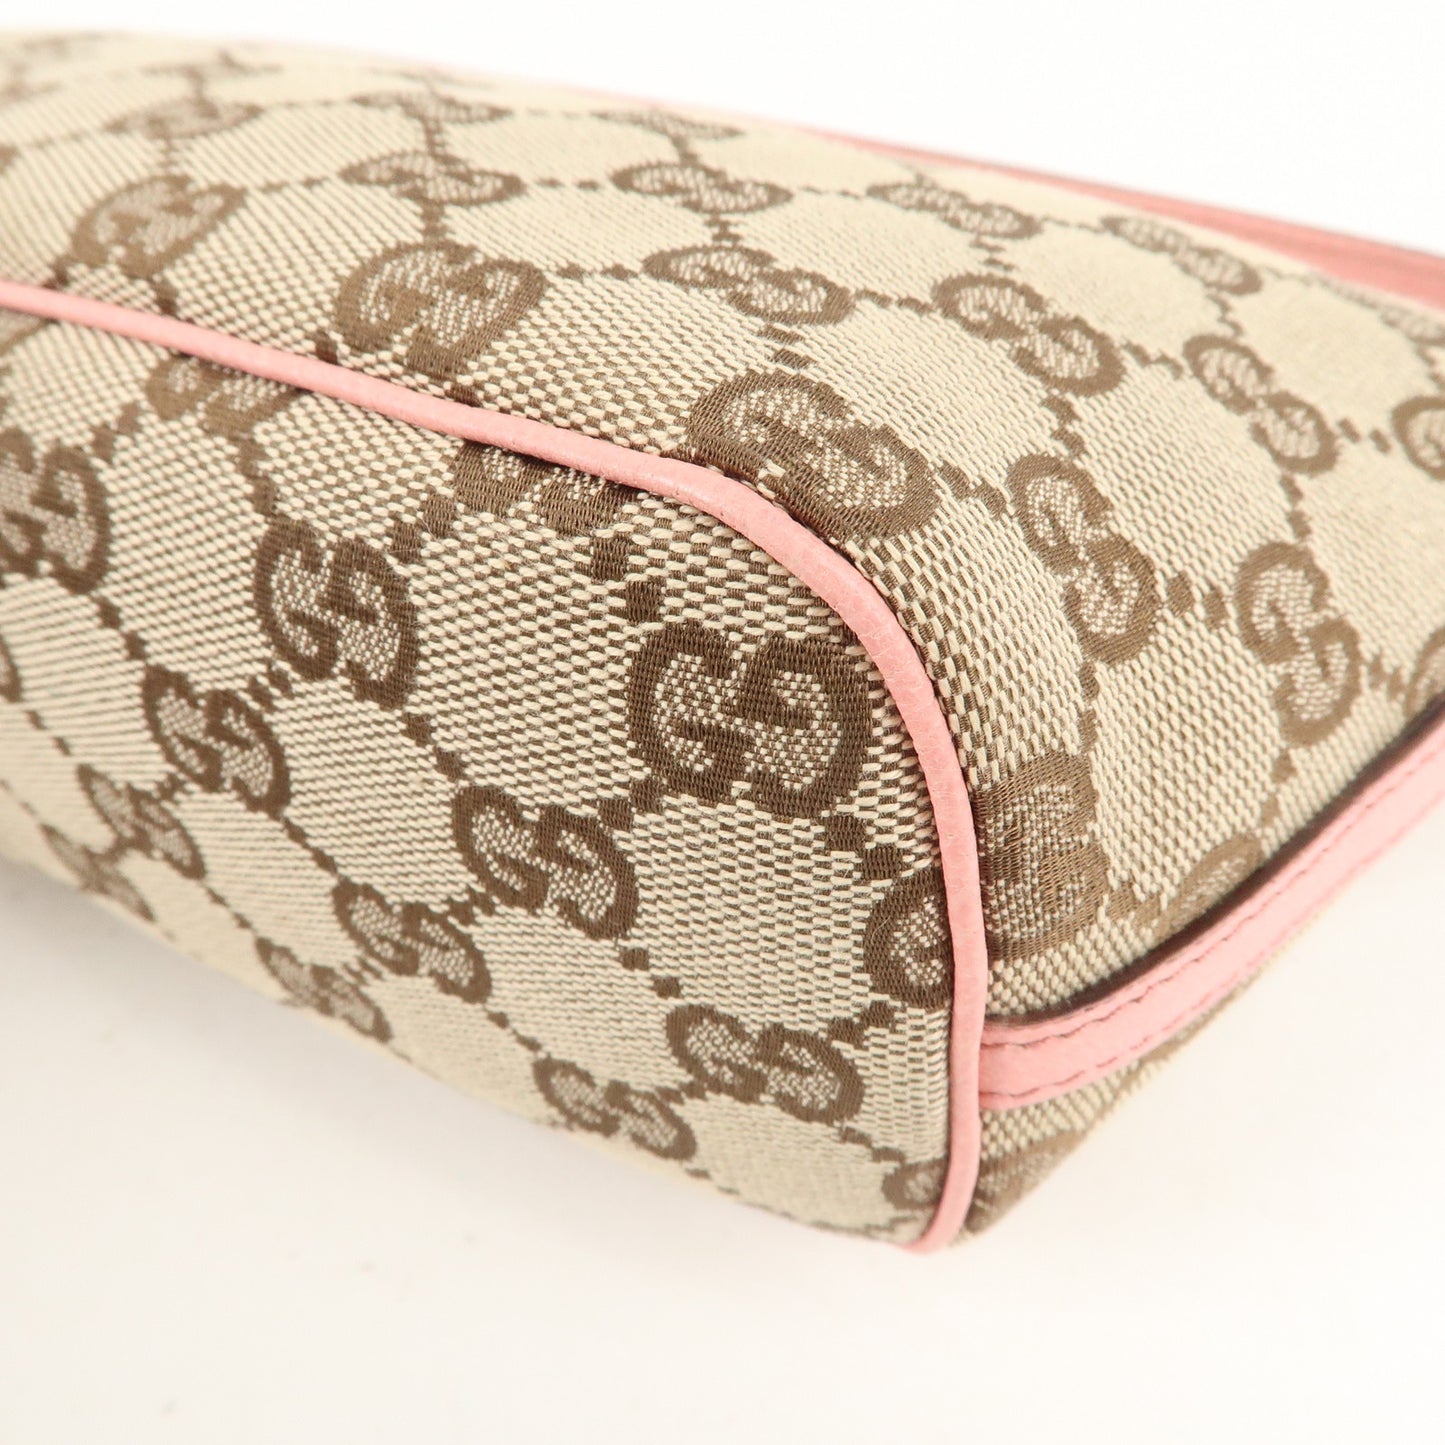 GUCCI Boat Bag GG Canvas Leather Hand Bag Pouch Beige Pink 07198